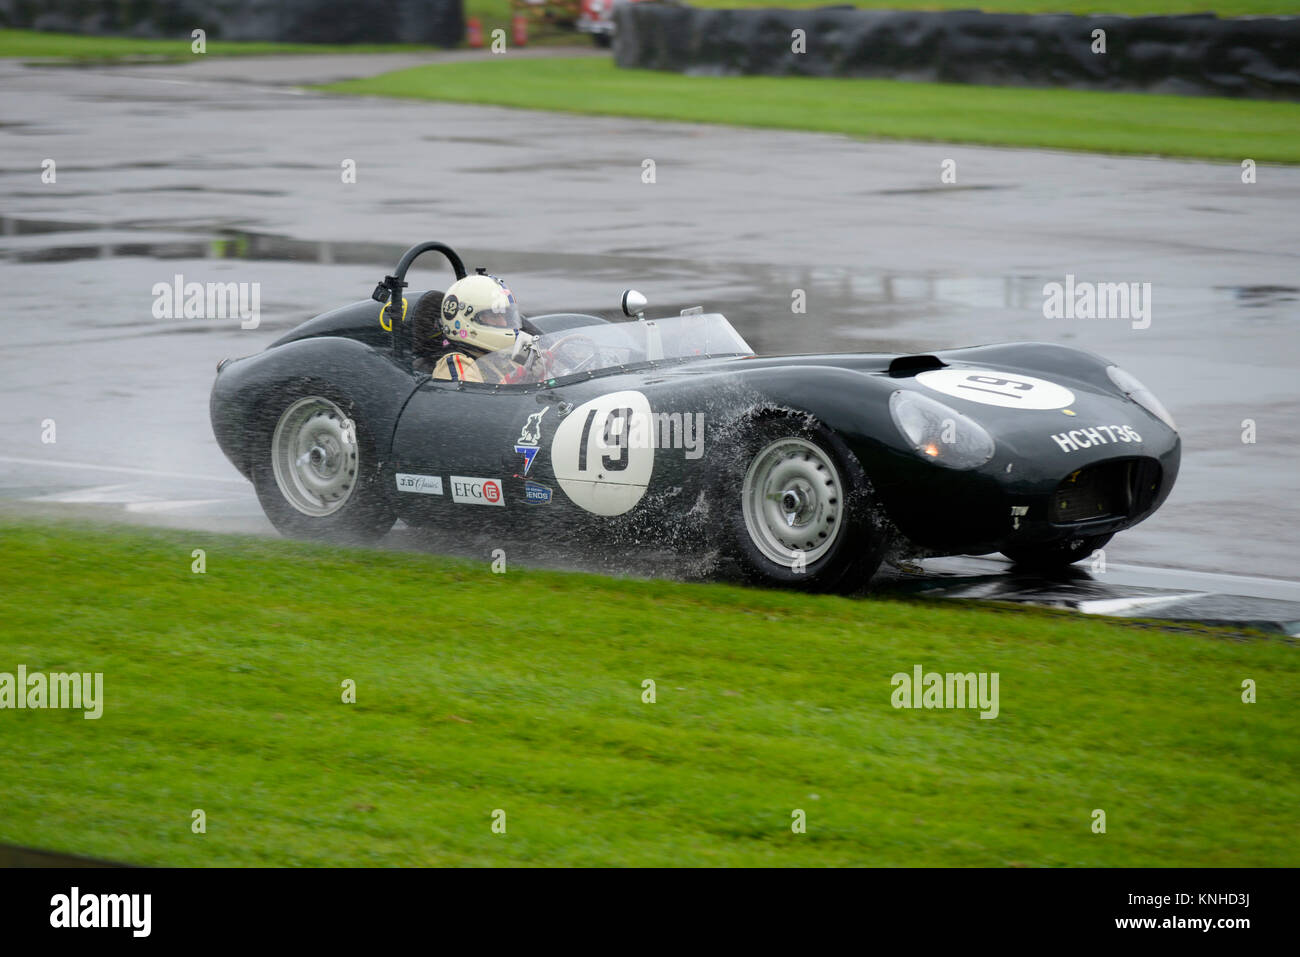 1958 Lister Jaguar Flat Iron owned and driven by Steve Boultbee Brooks racing in the Sussex Trophy at Goodwood Revival 2017 Stock Photo